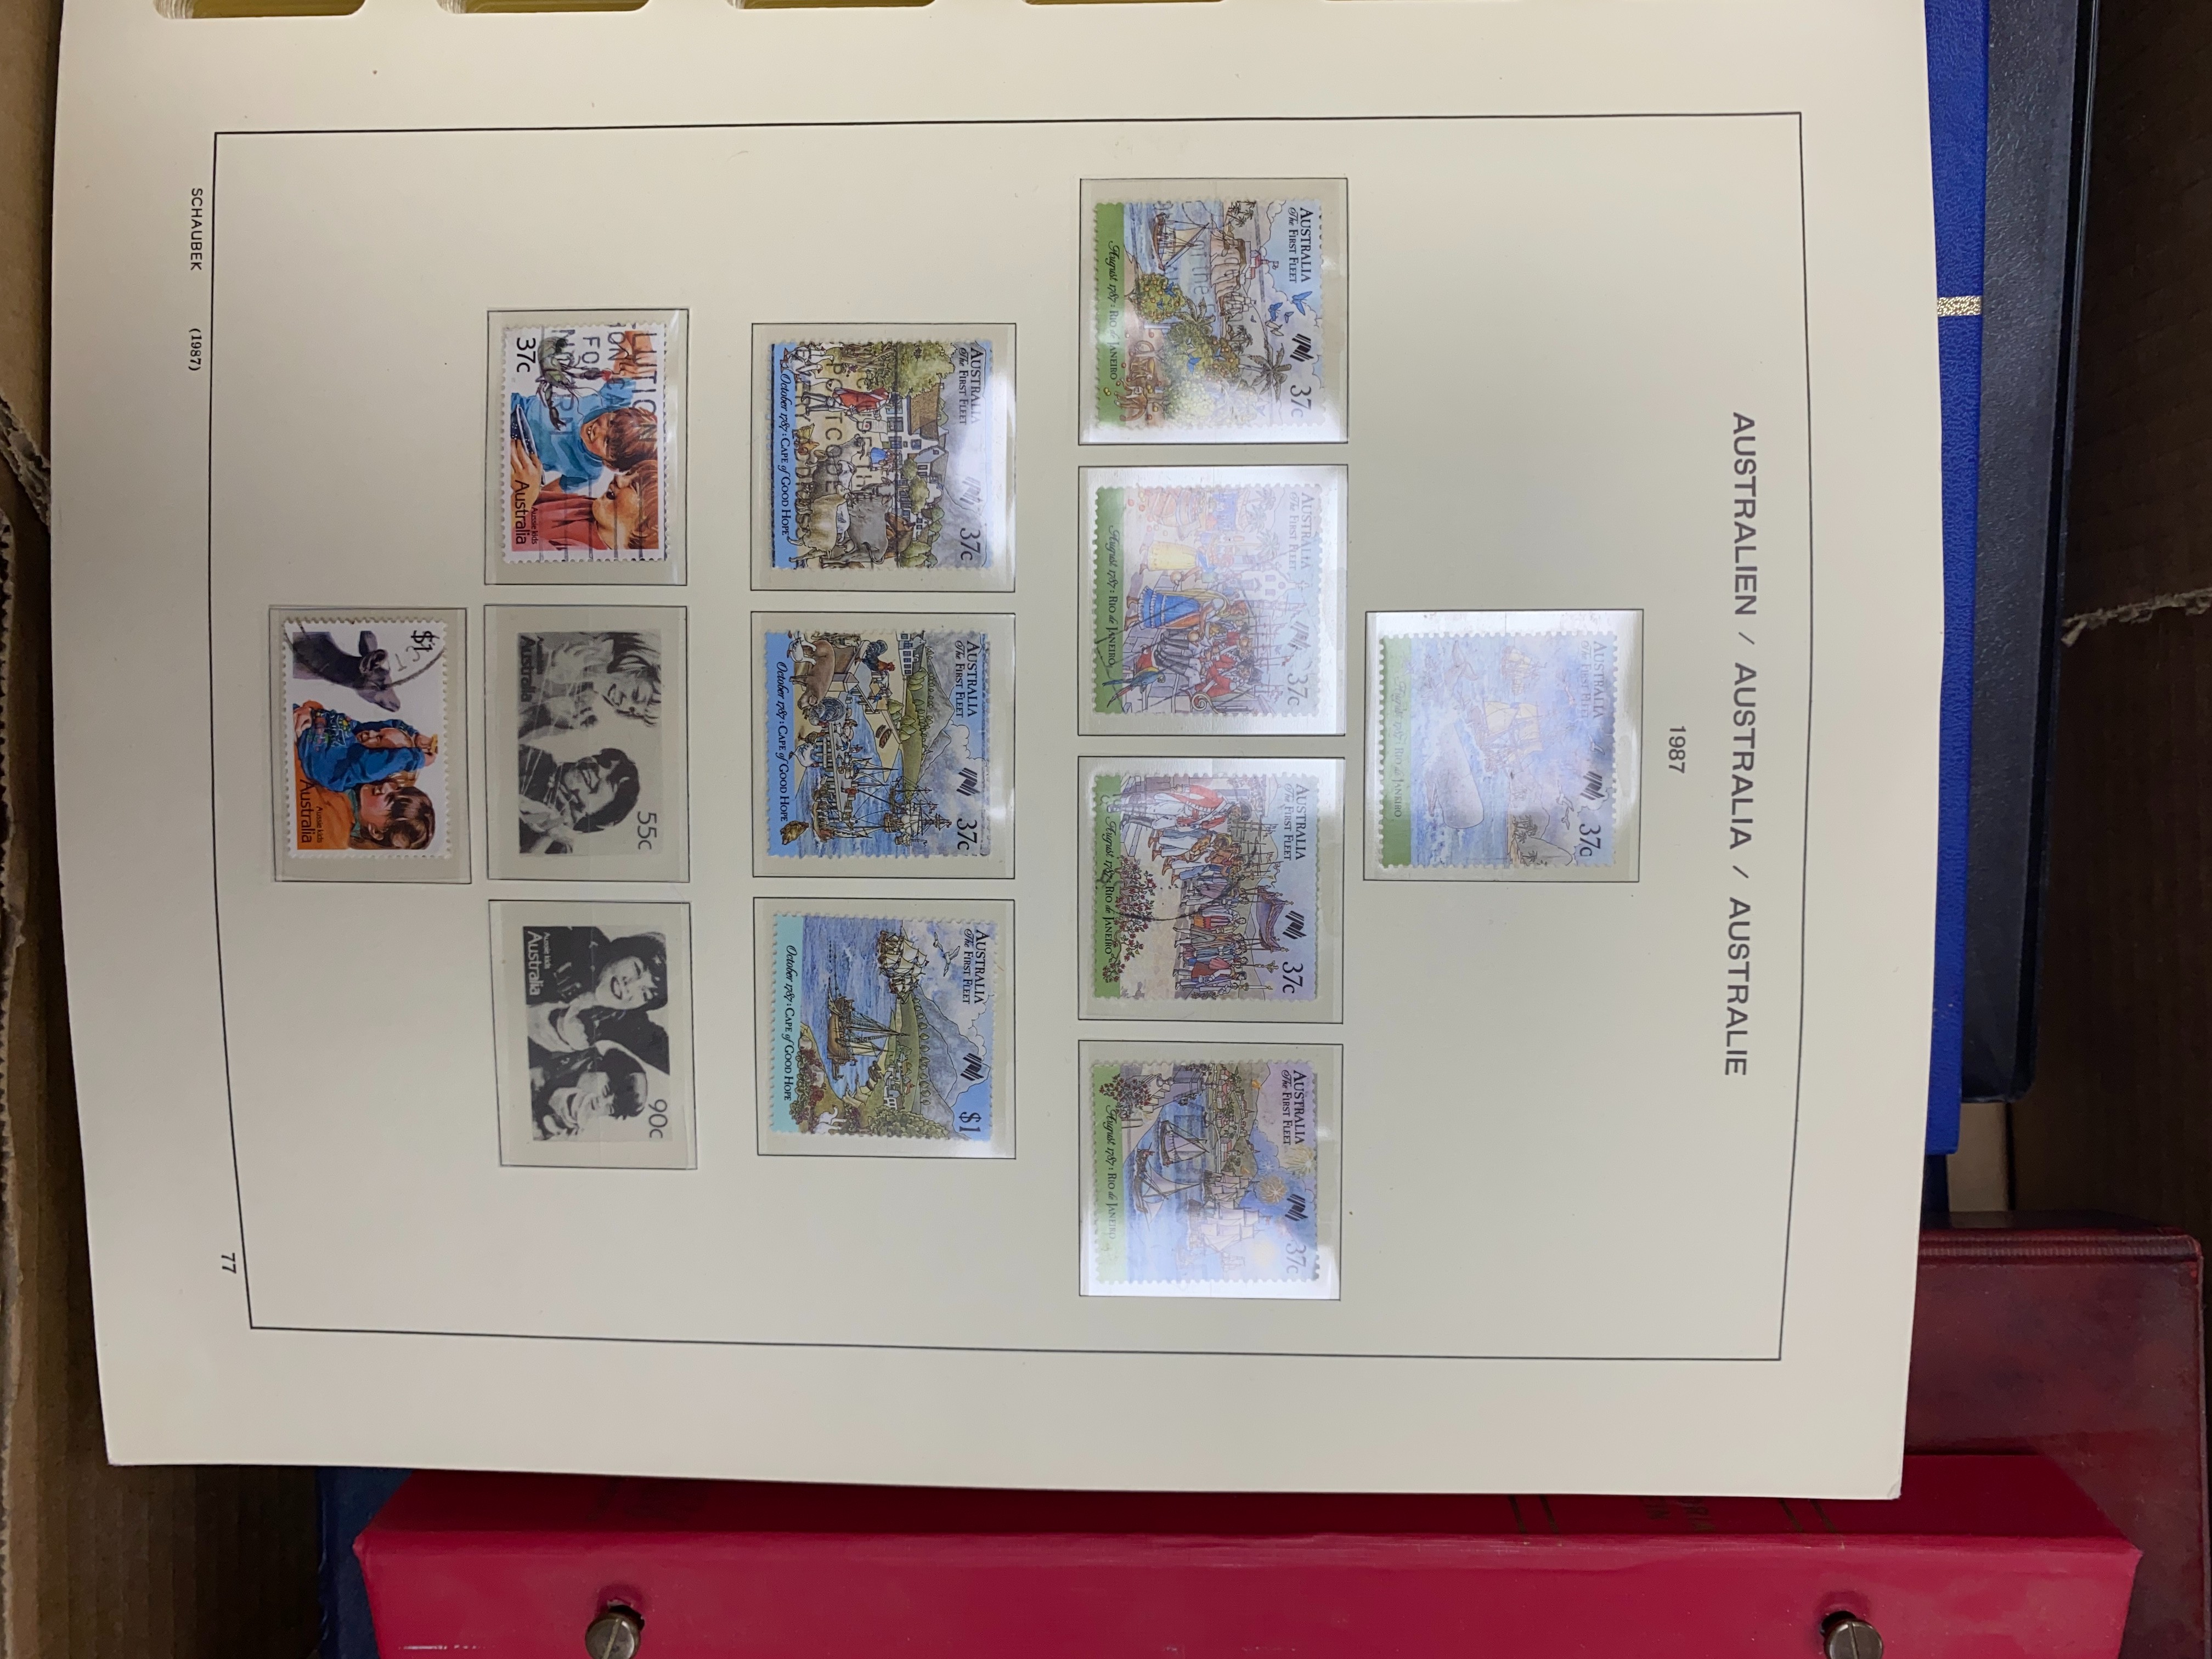 A stamp collection in albums with Great Britain including Decimal Mint, British Commonwealth, Hong Kong, India and Malaya